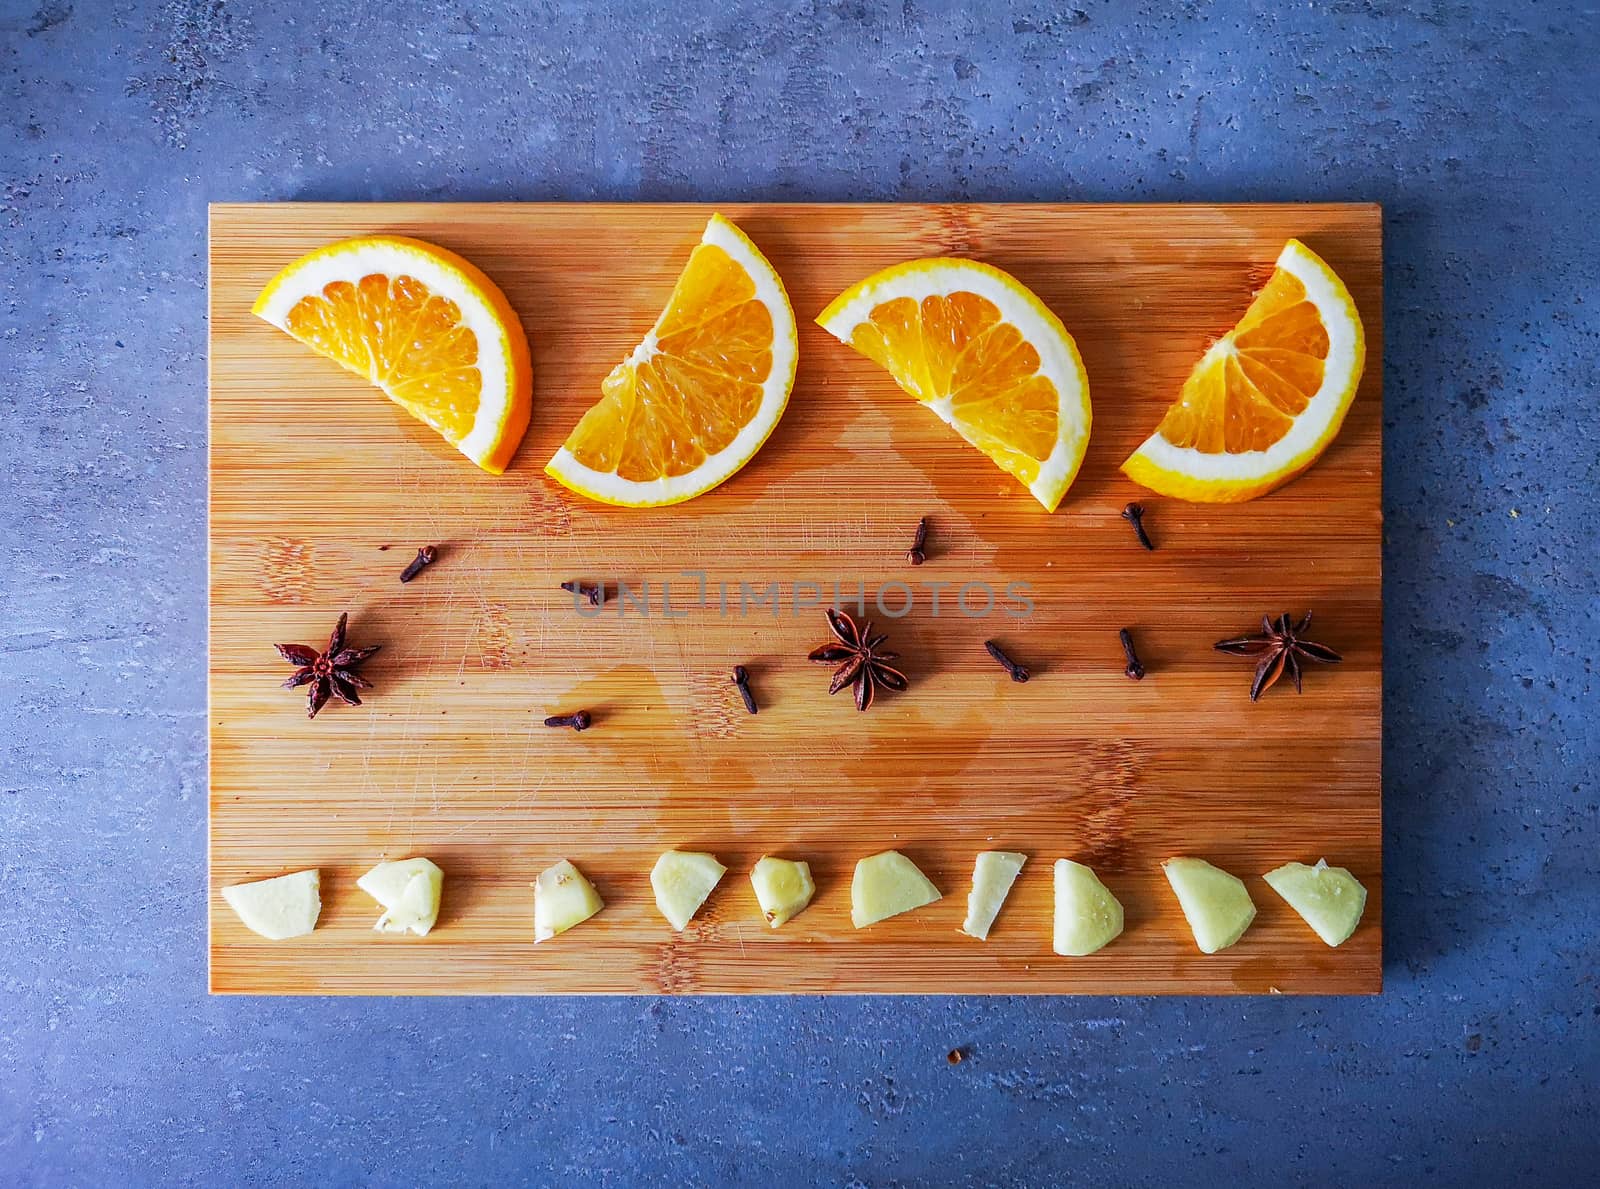 Oranges cloves anise ginger on wooden board as ingredients for mulled wine or beer by Wierzchu